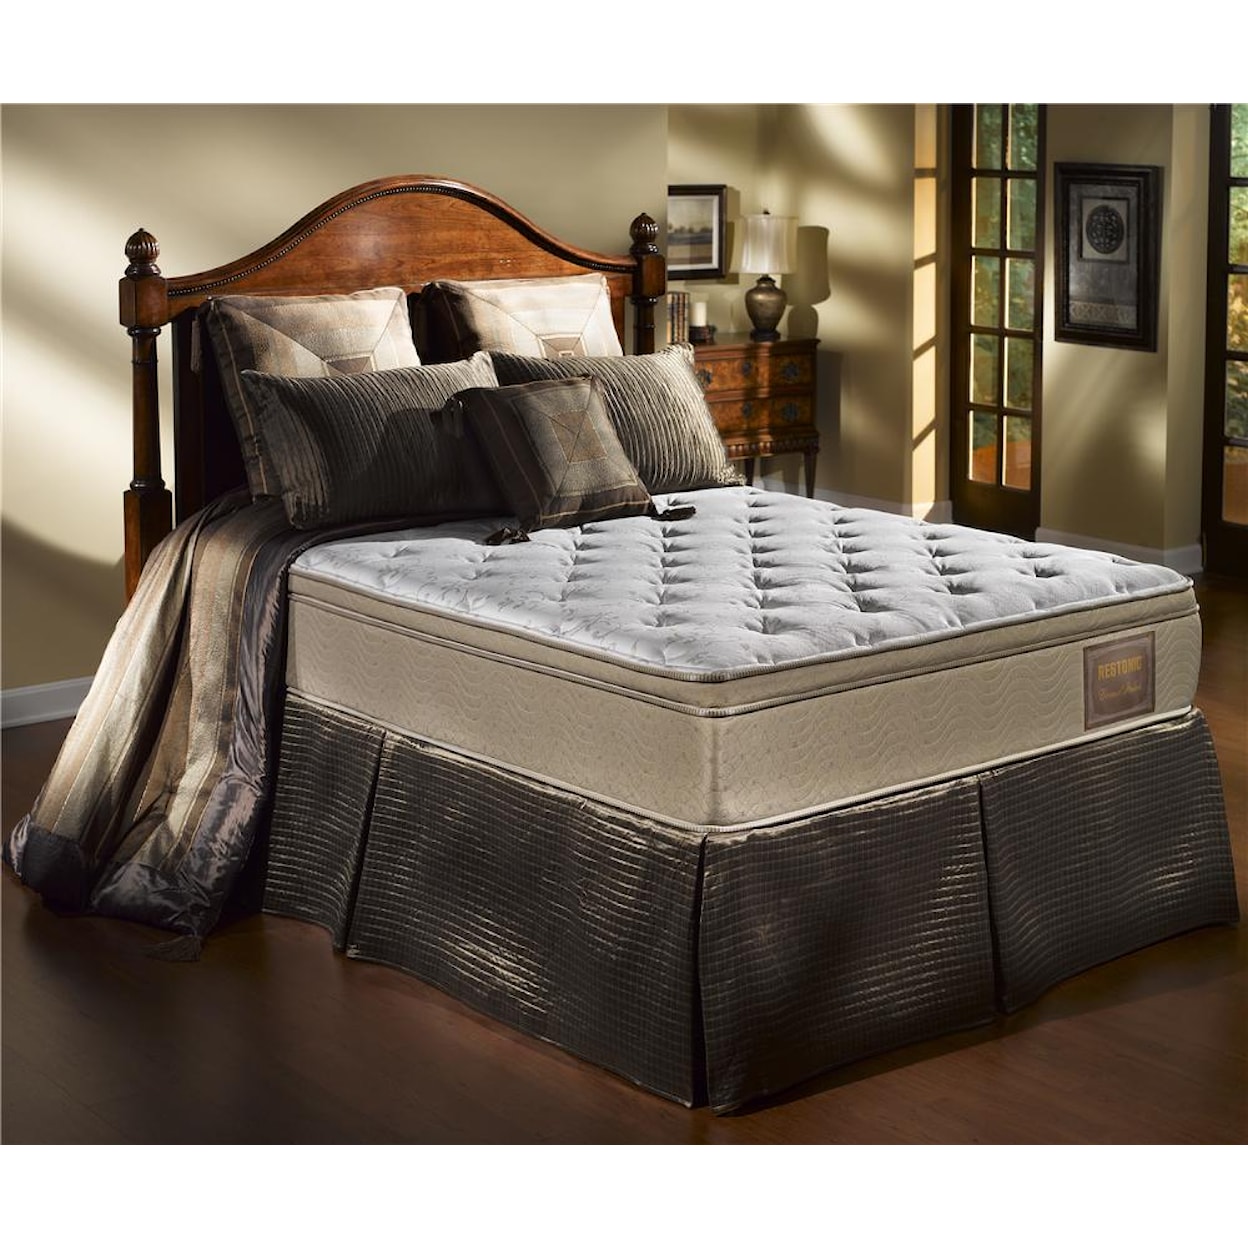 Upper Midwest Bedding- Restonic Grand Palais Chateau Euro Top